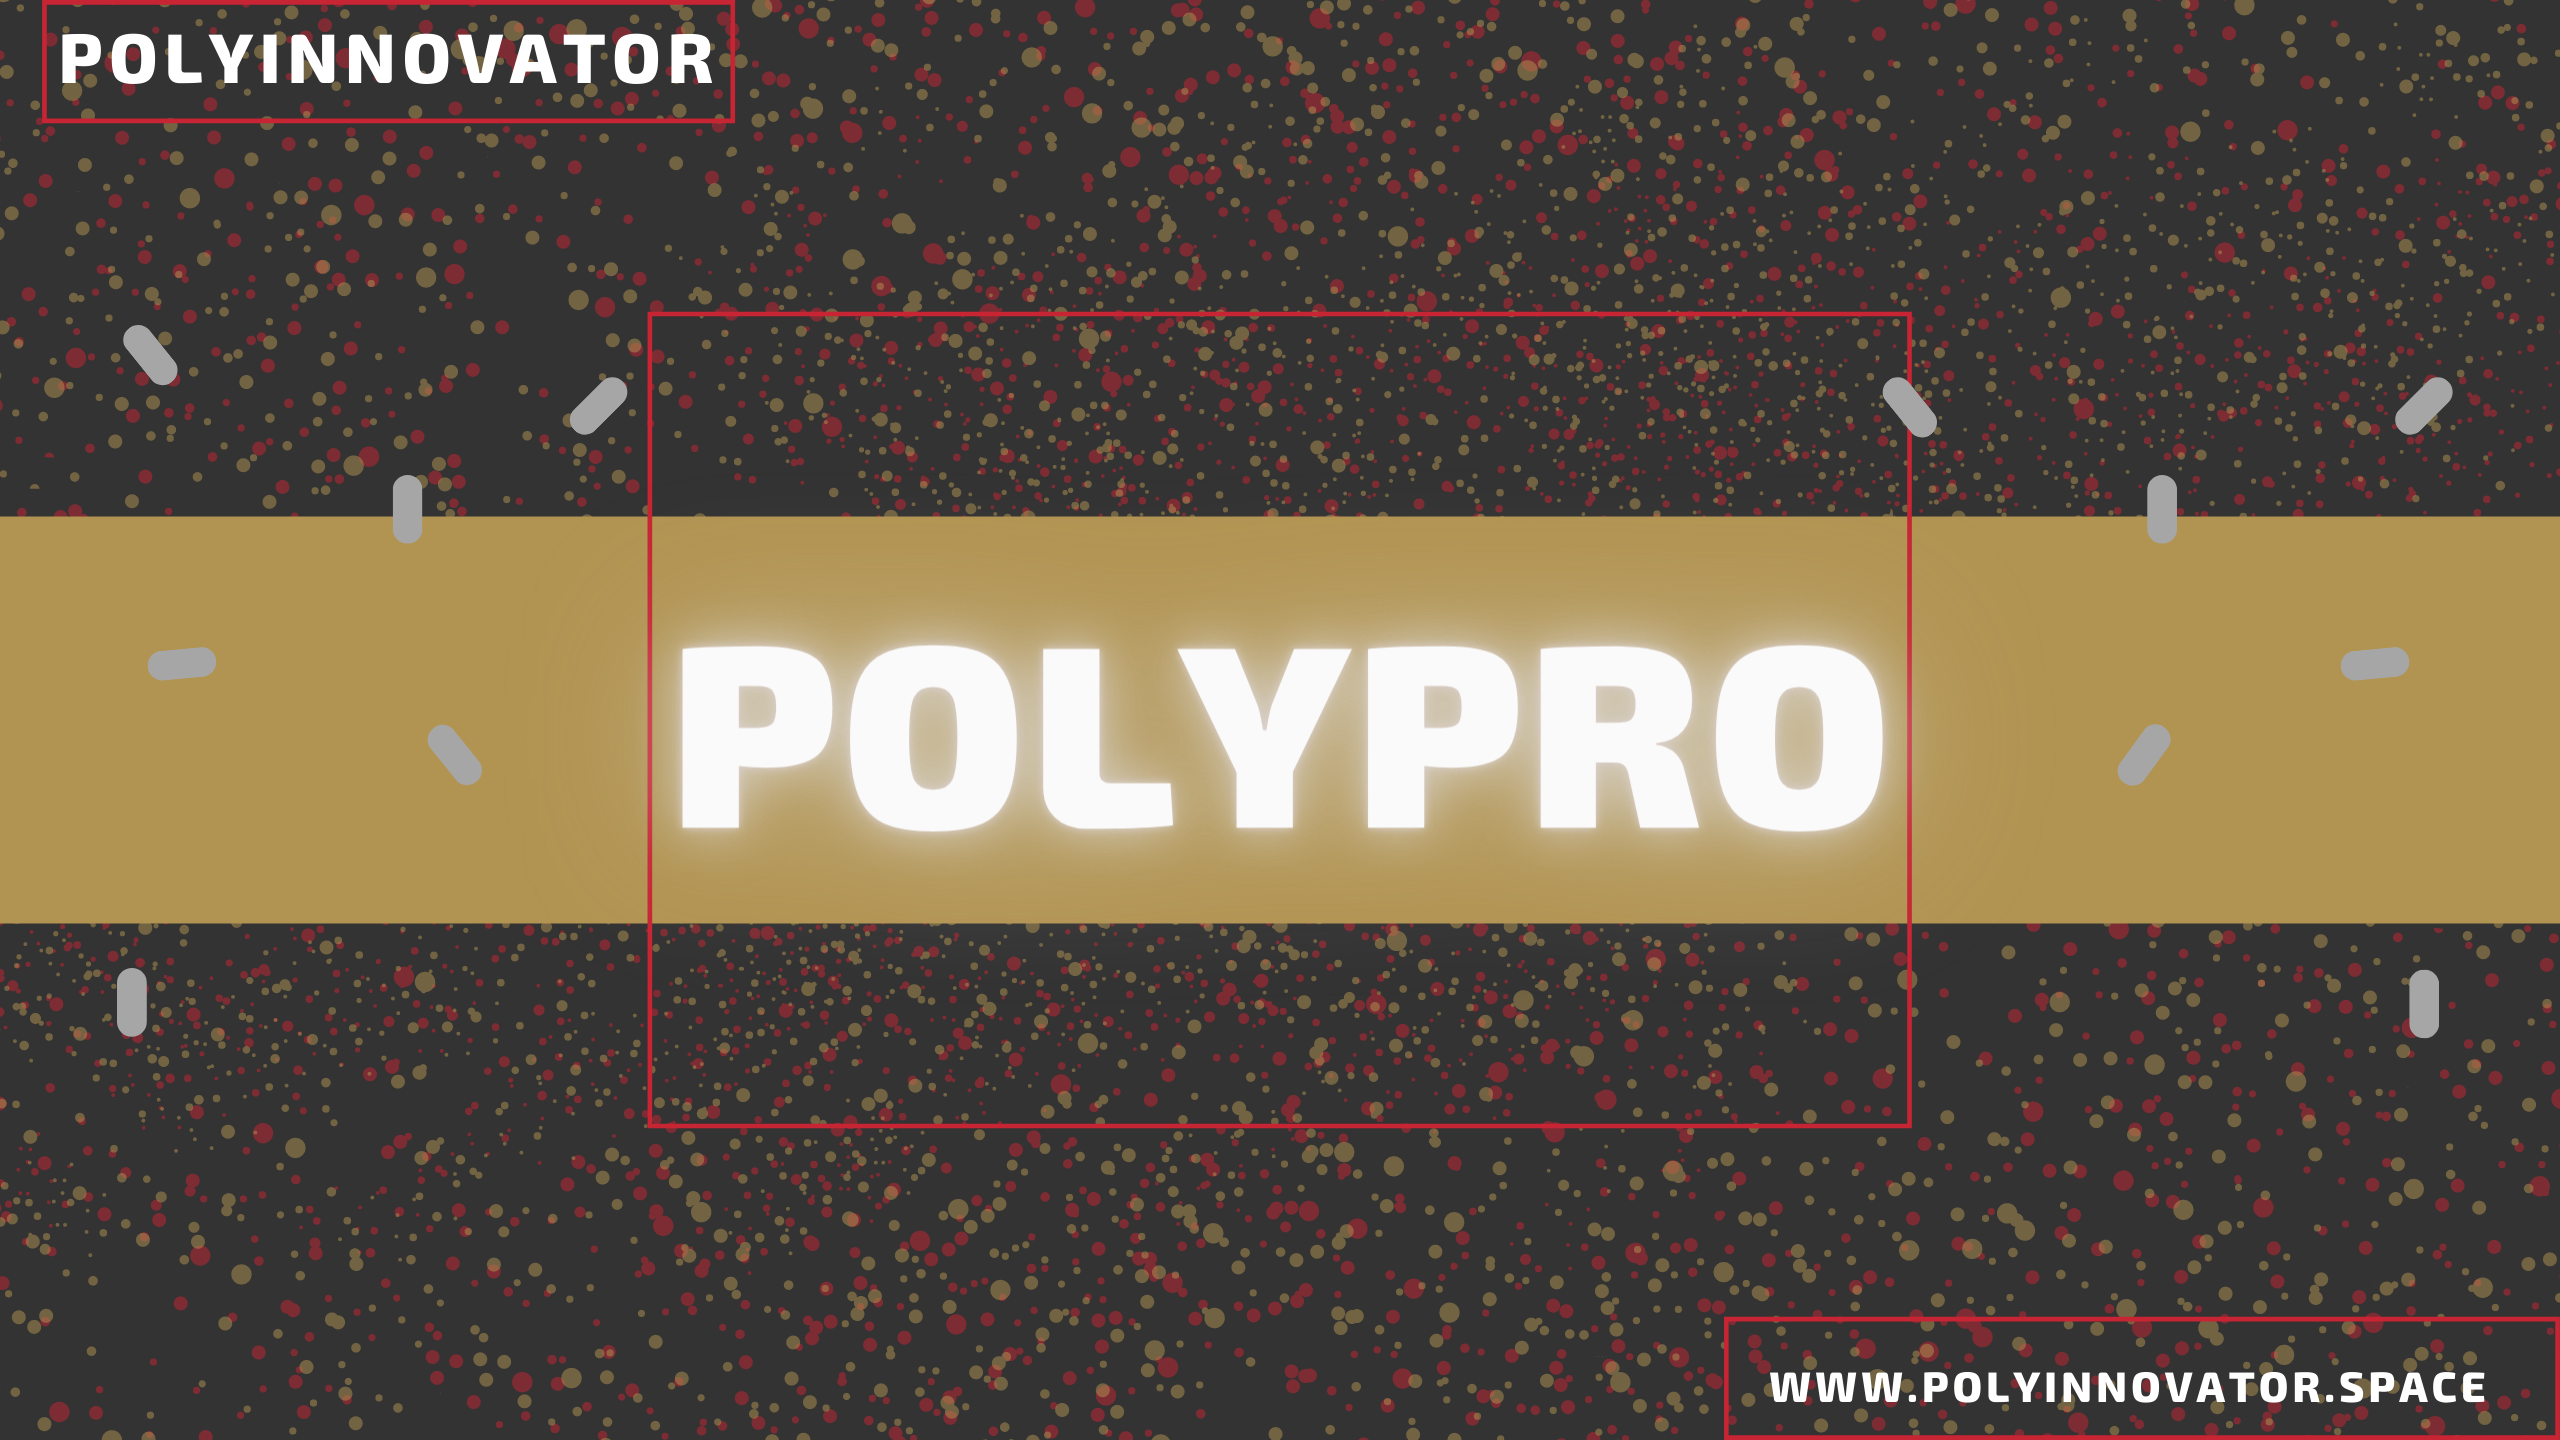 What is PolyPro?